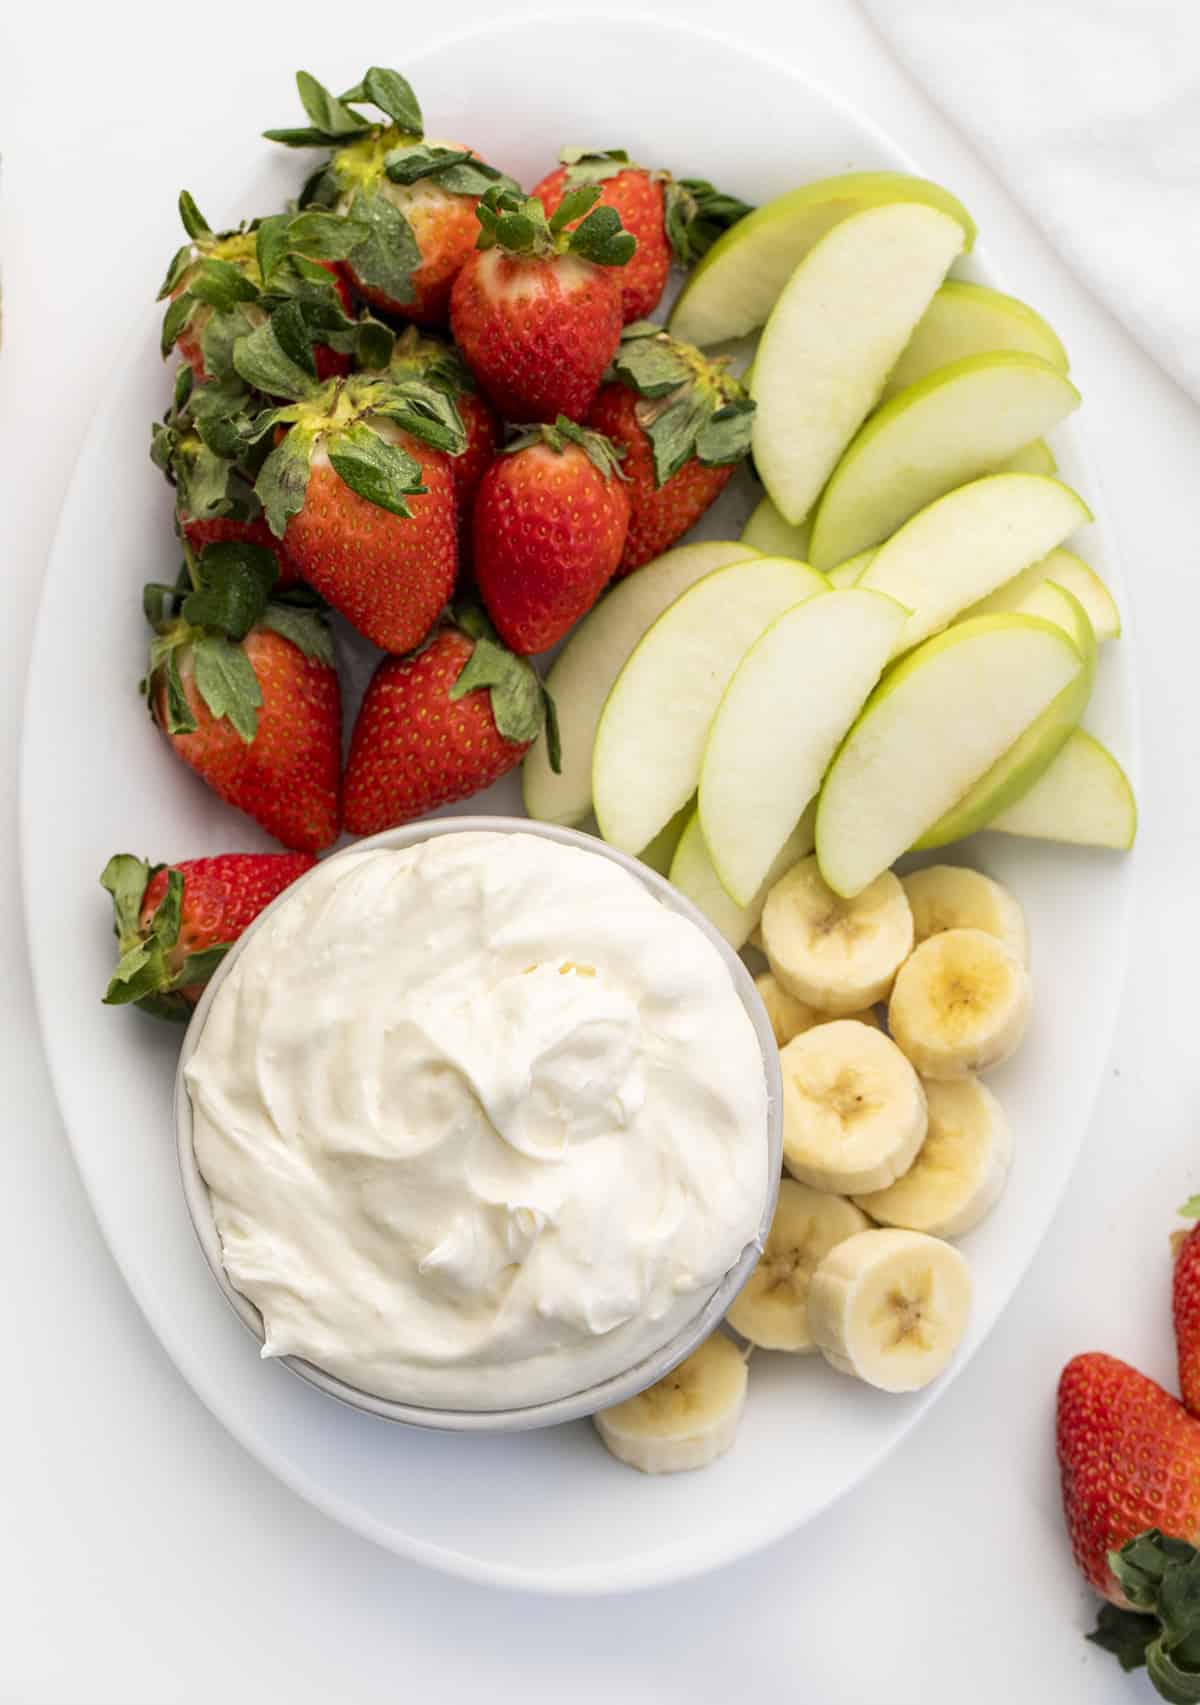 Plate of Easy Fruit Dip with Apples, Bananas, and Strawberries